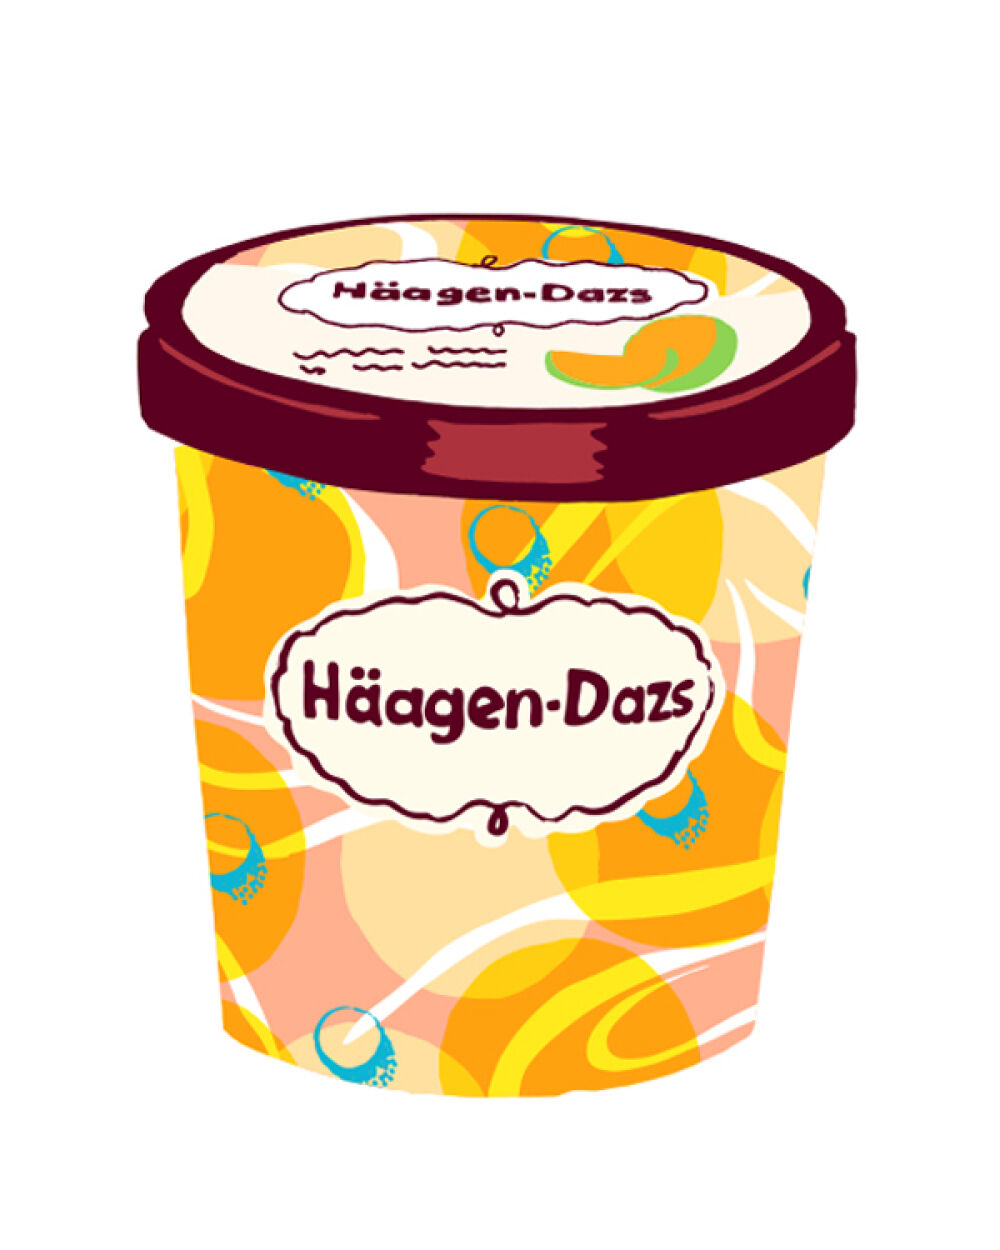 Packaging illustration by Erica Jacobson for Häagen-Dazs